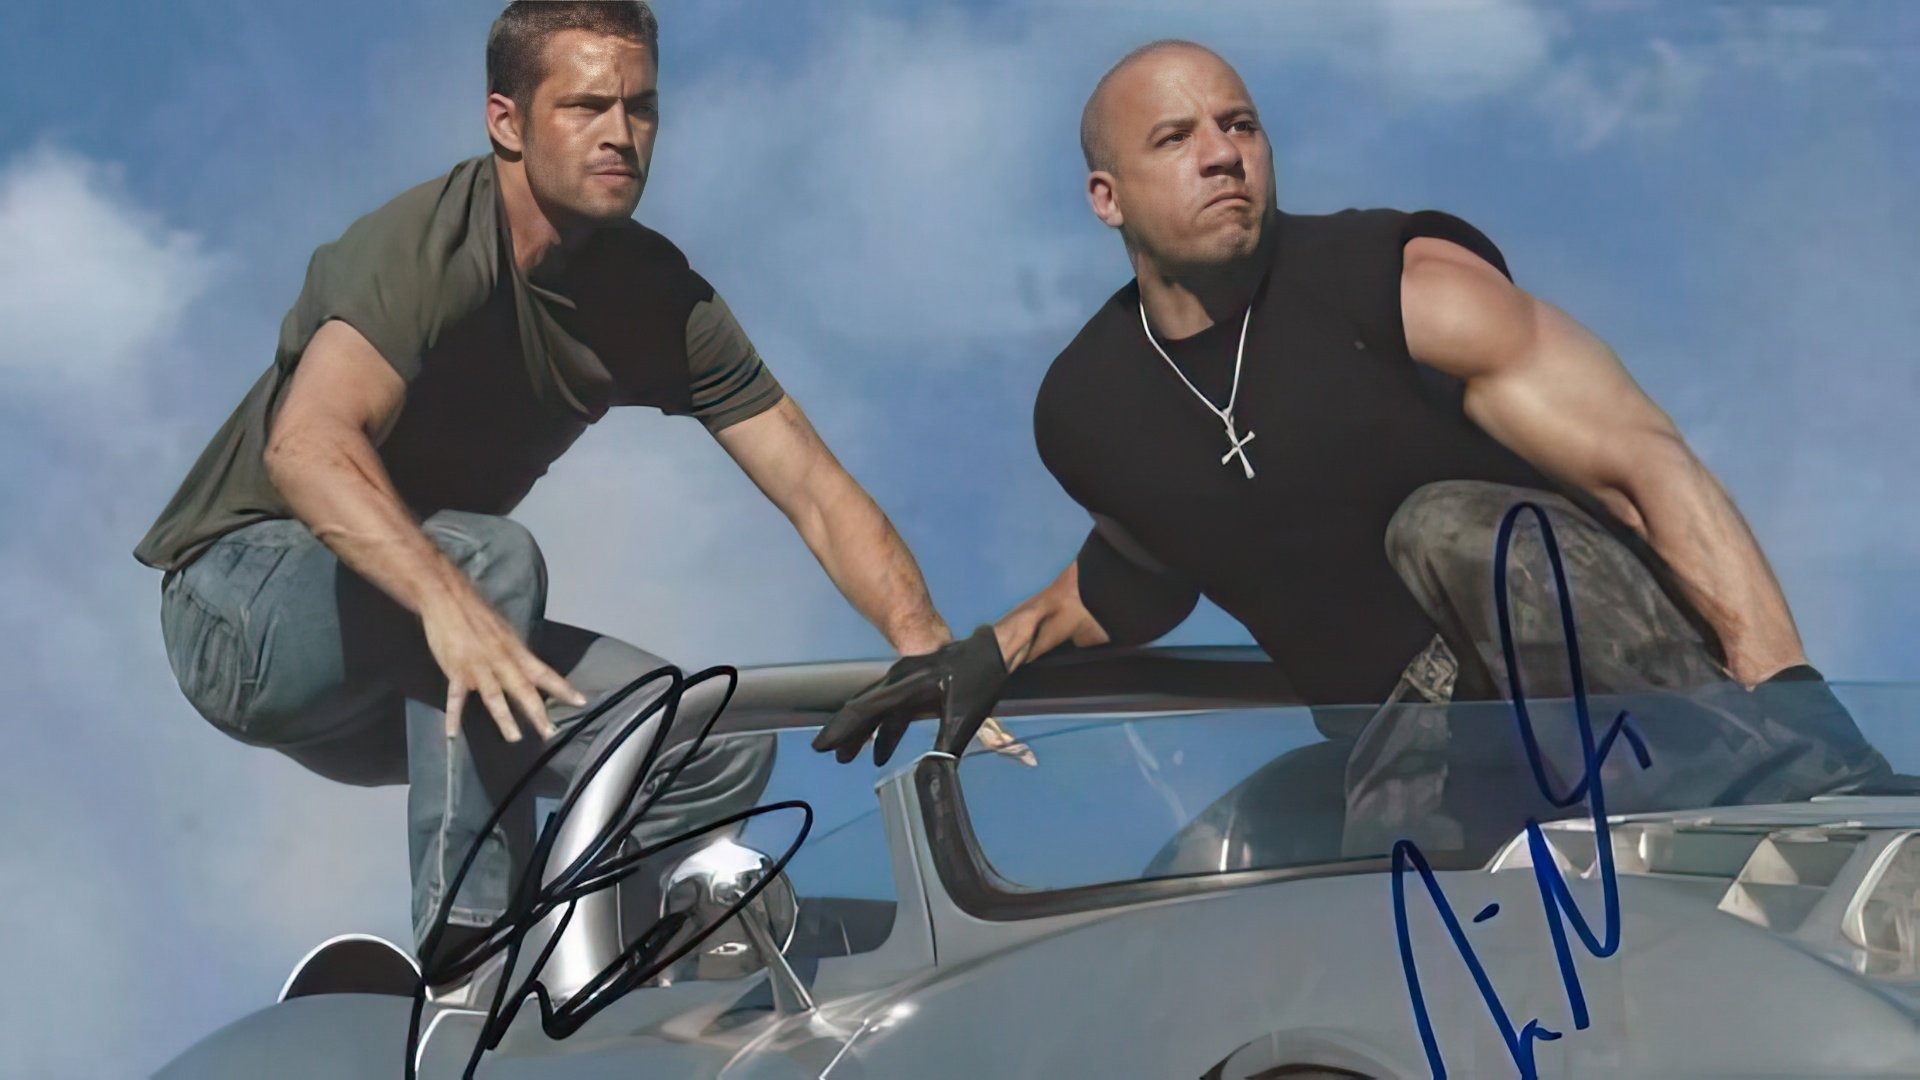 A picture from filming «The Fast and The Furious» autographed by Vin Diesel and Paul Walker